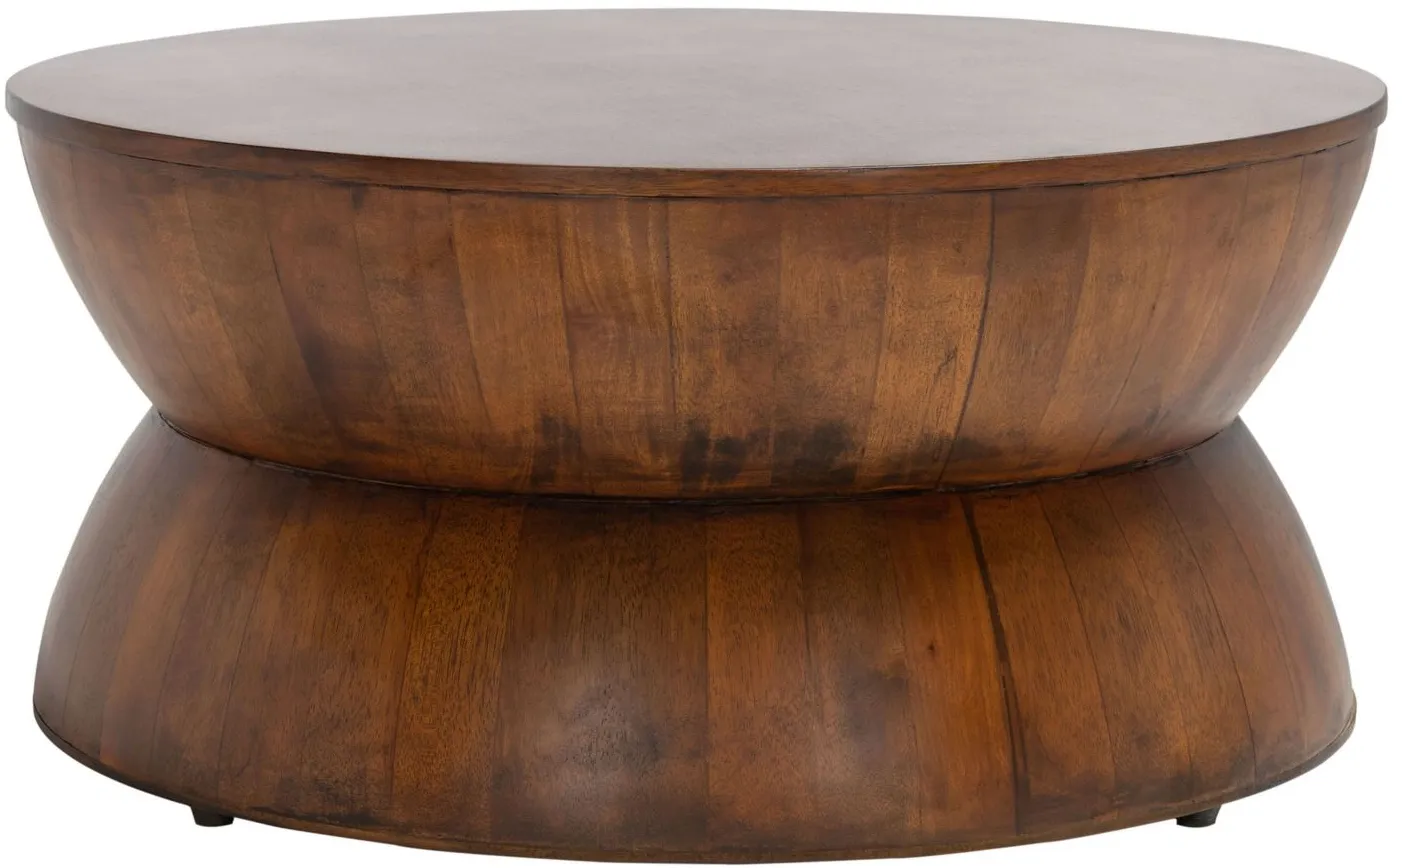 Amalya Round Coffee Table in Brown by Safavieh